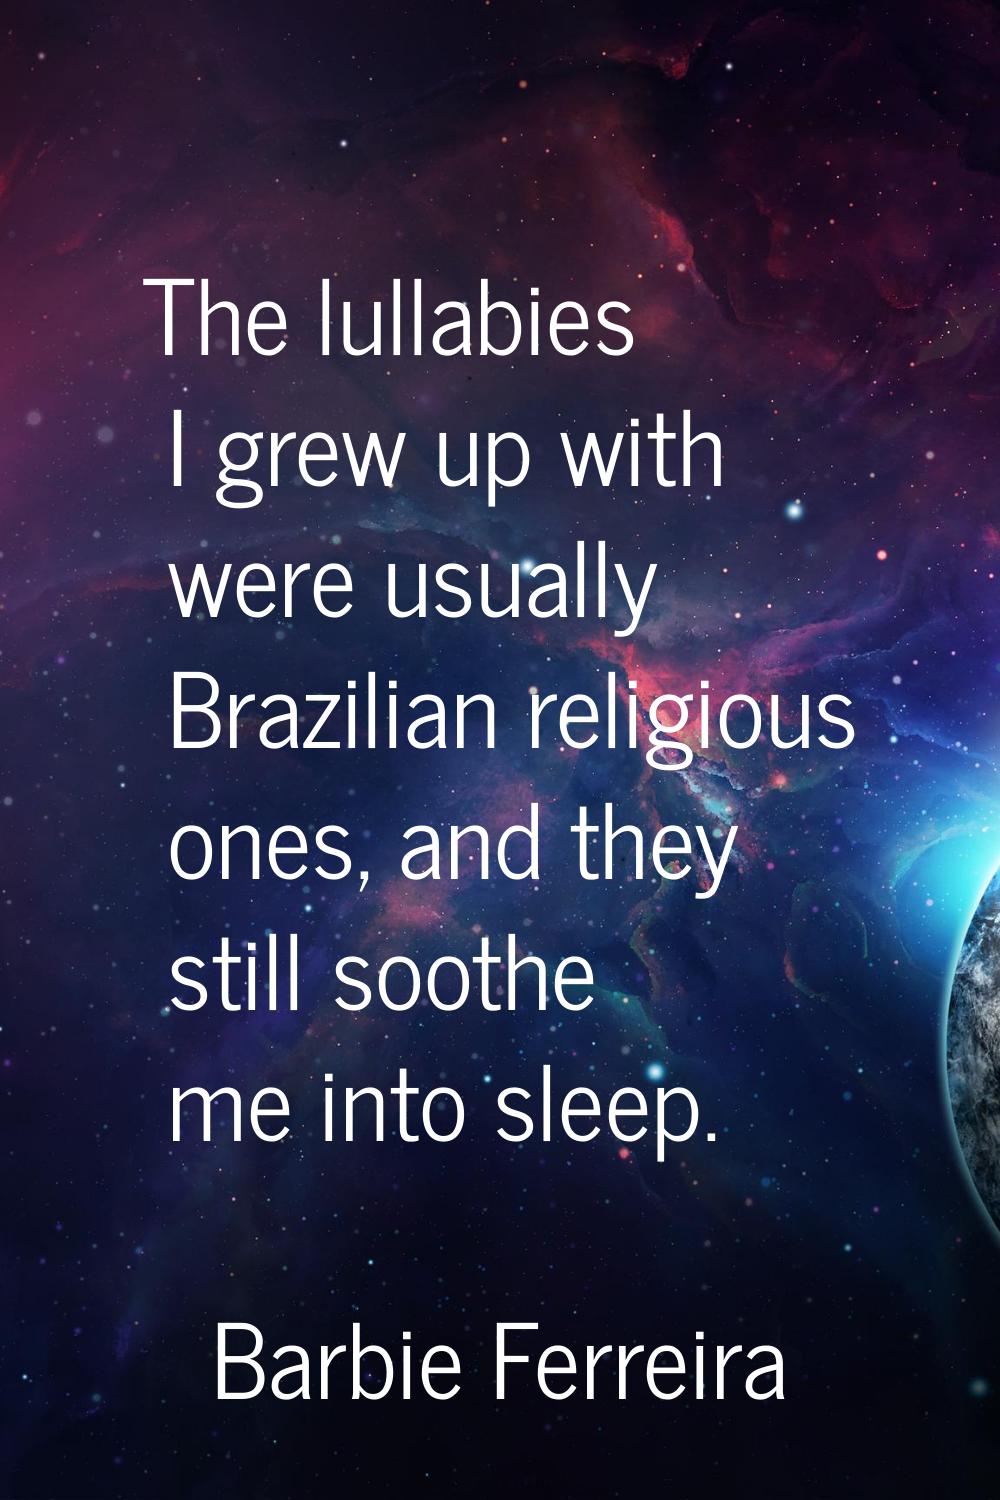 The lullabies I grew up with were usually Brazilian religious ones, and they still soothe me into s